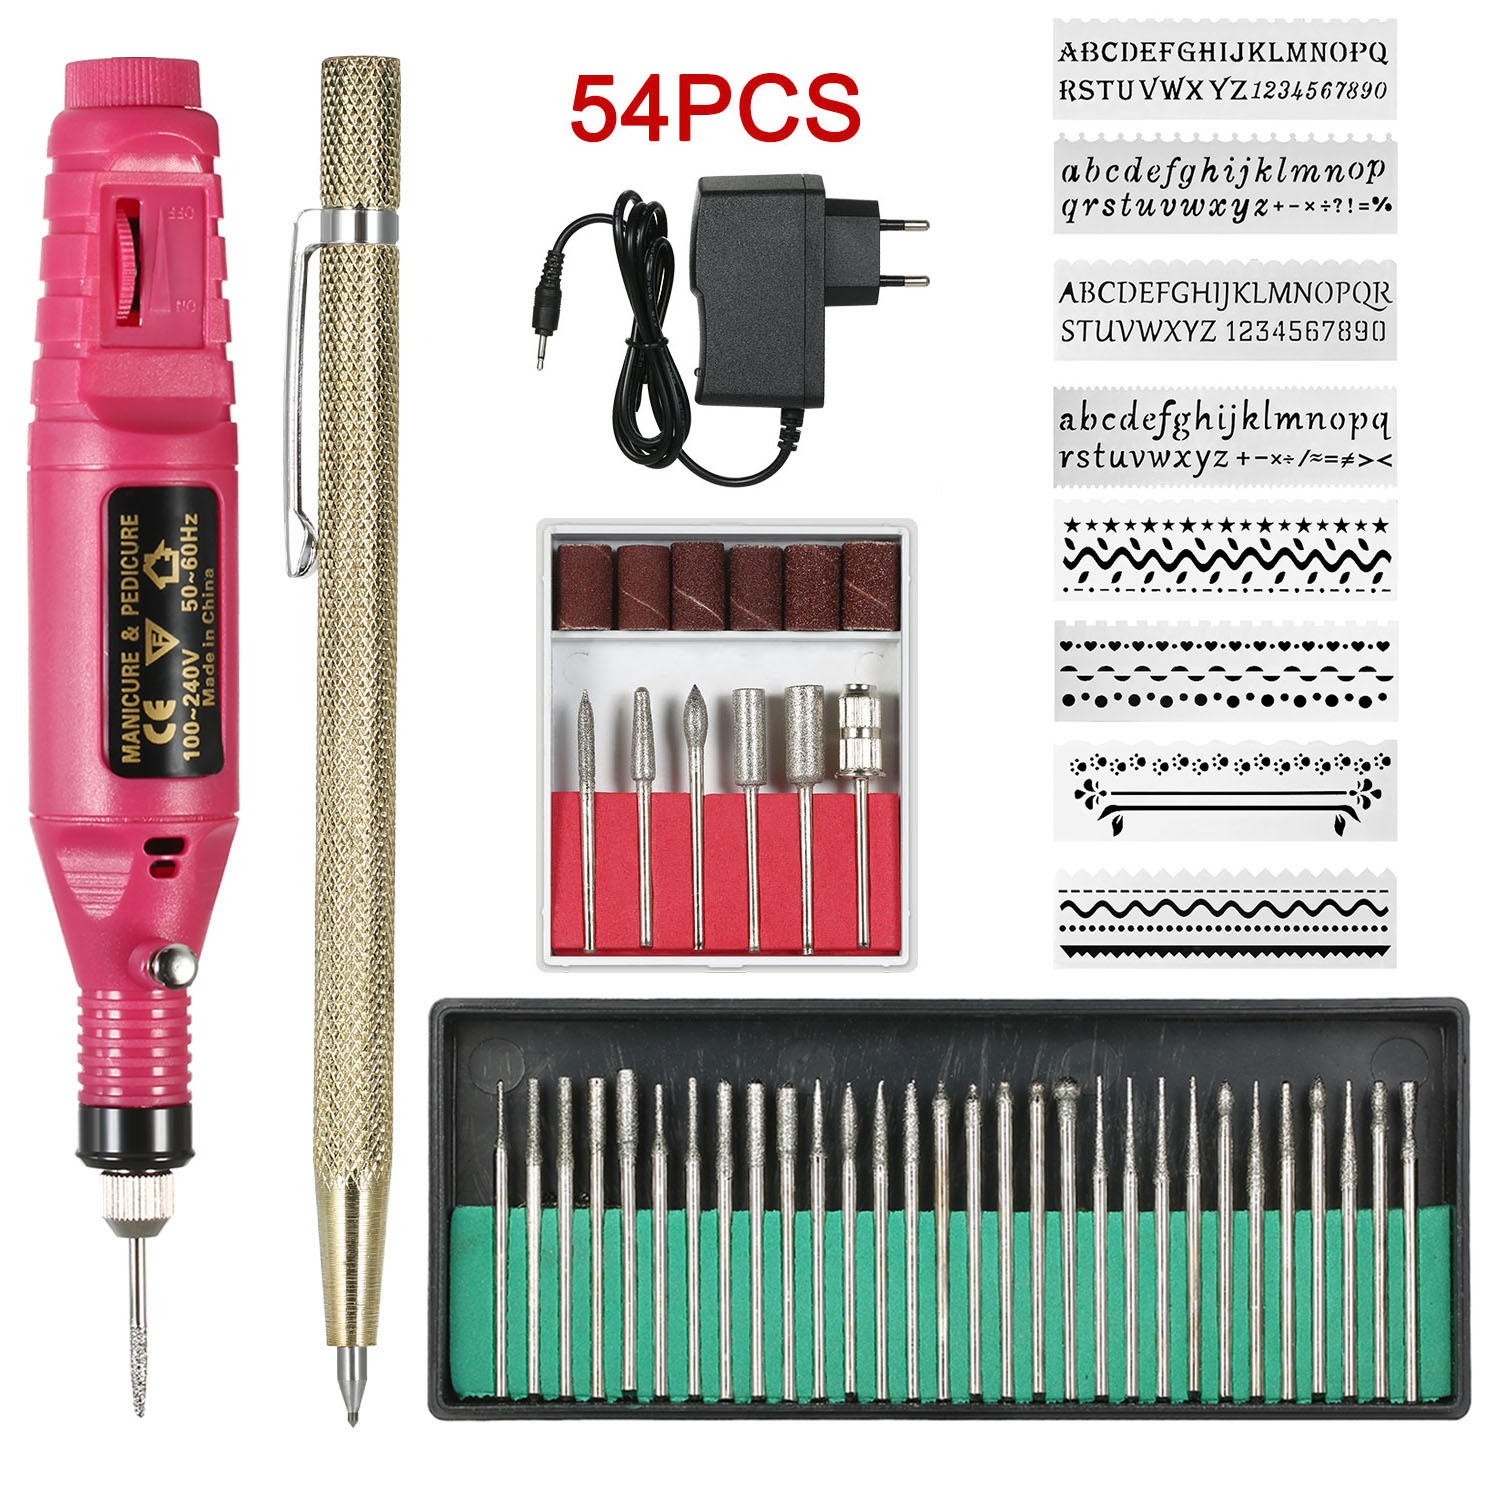 54Pcs Electric Micro Engraver Pen Engraving Tool For DIY Jewelry Metal Glass New 